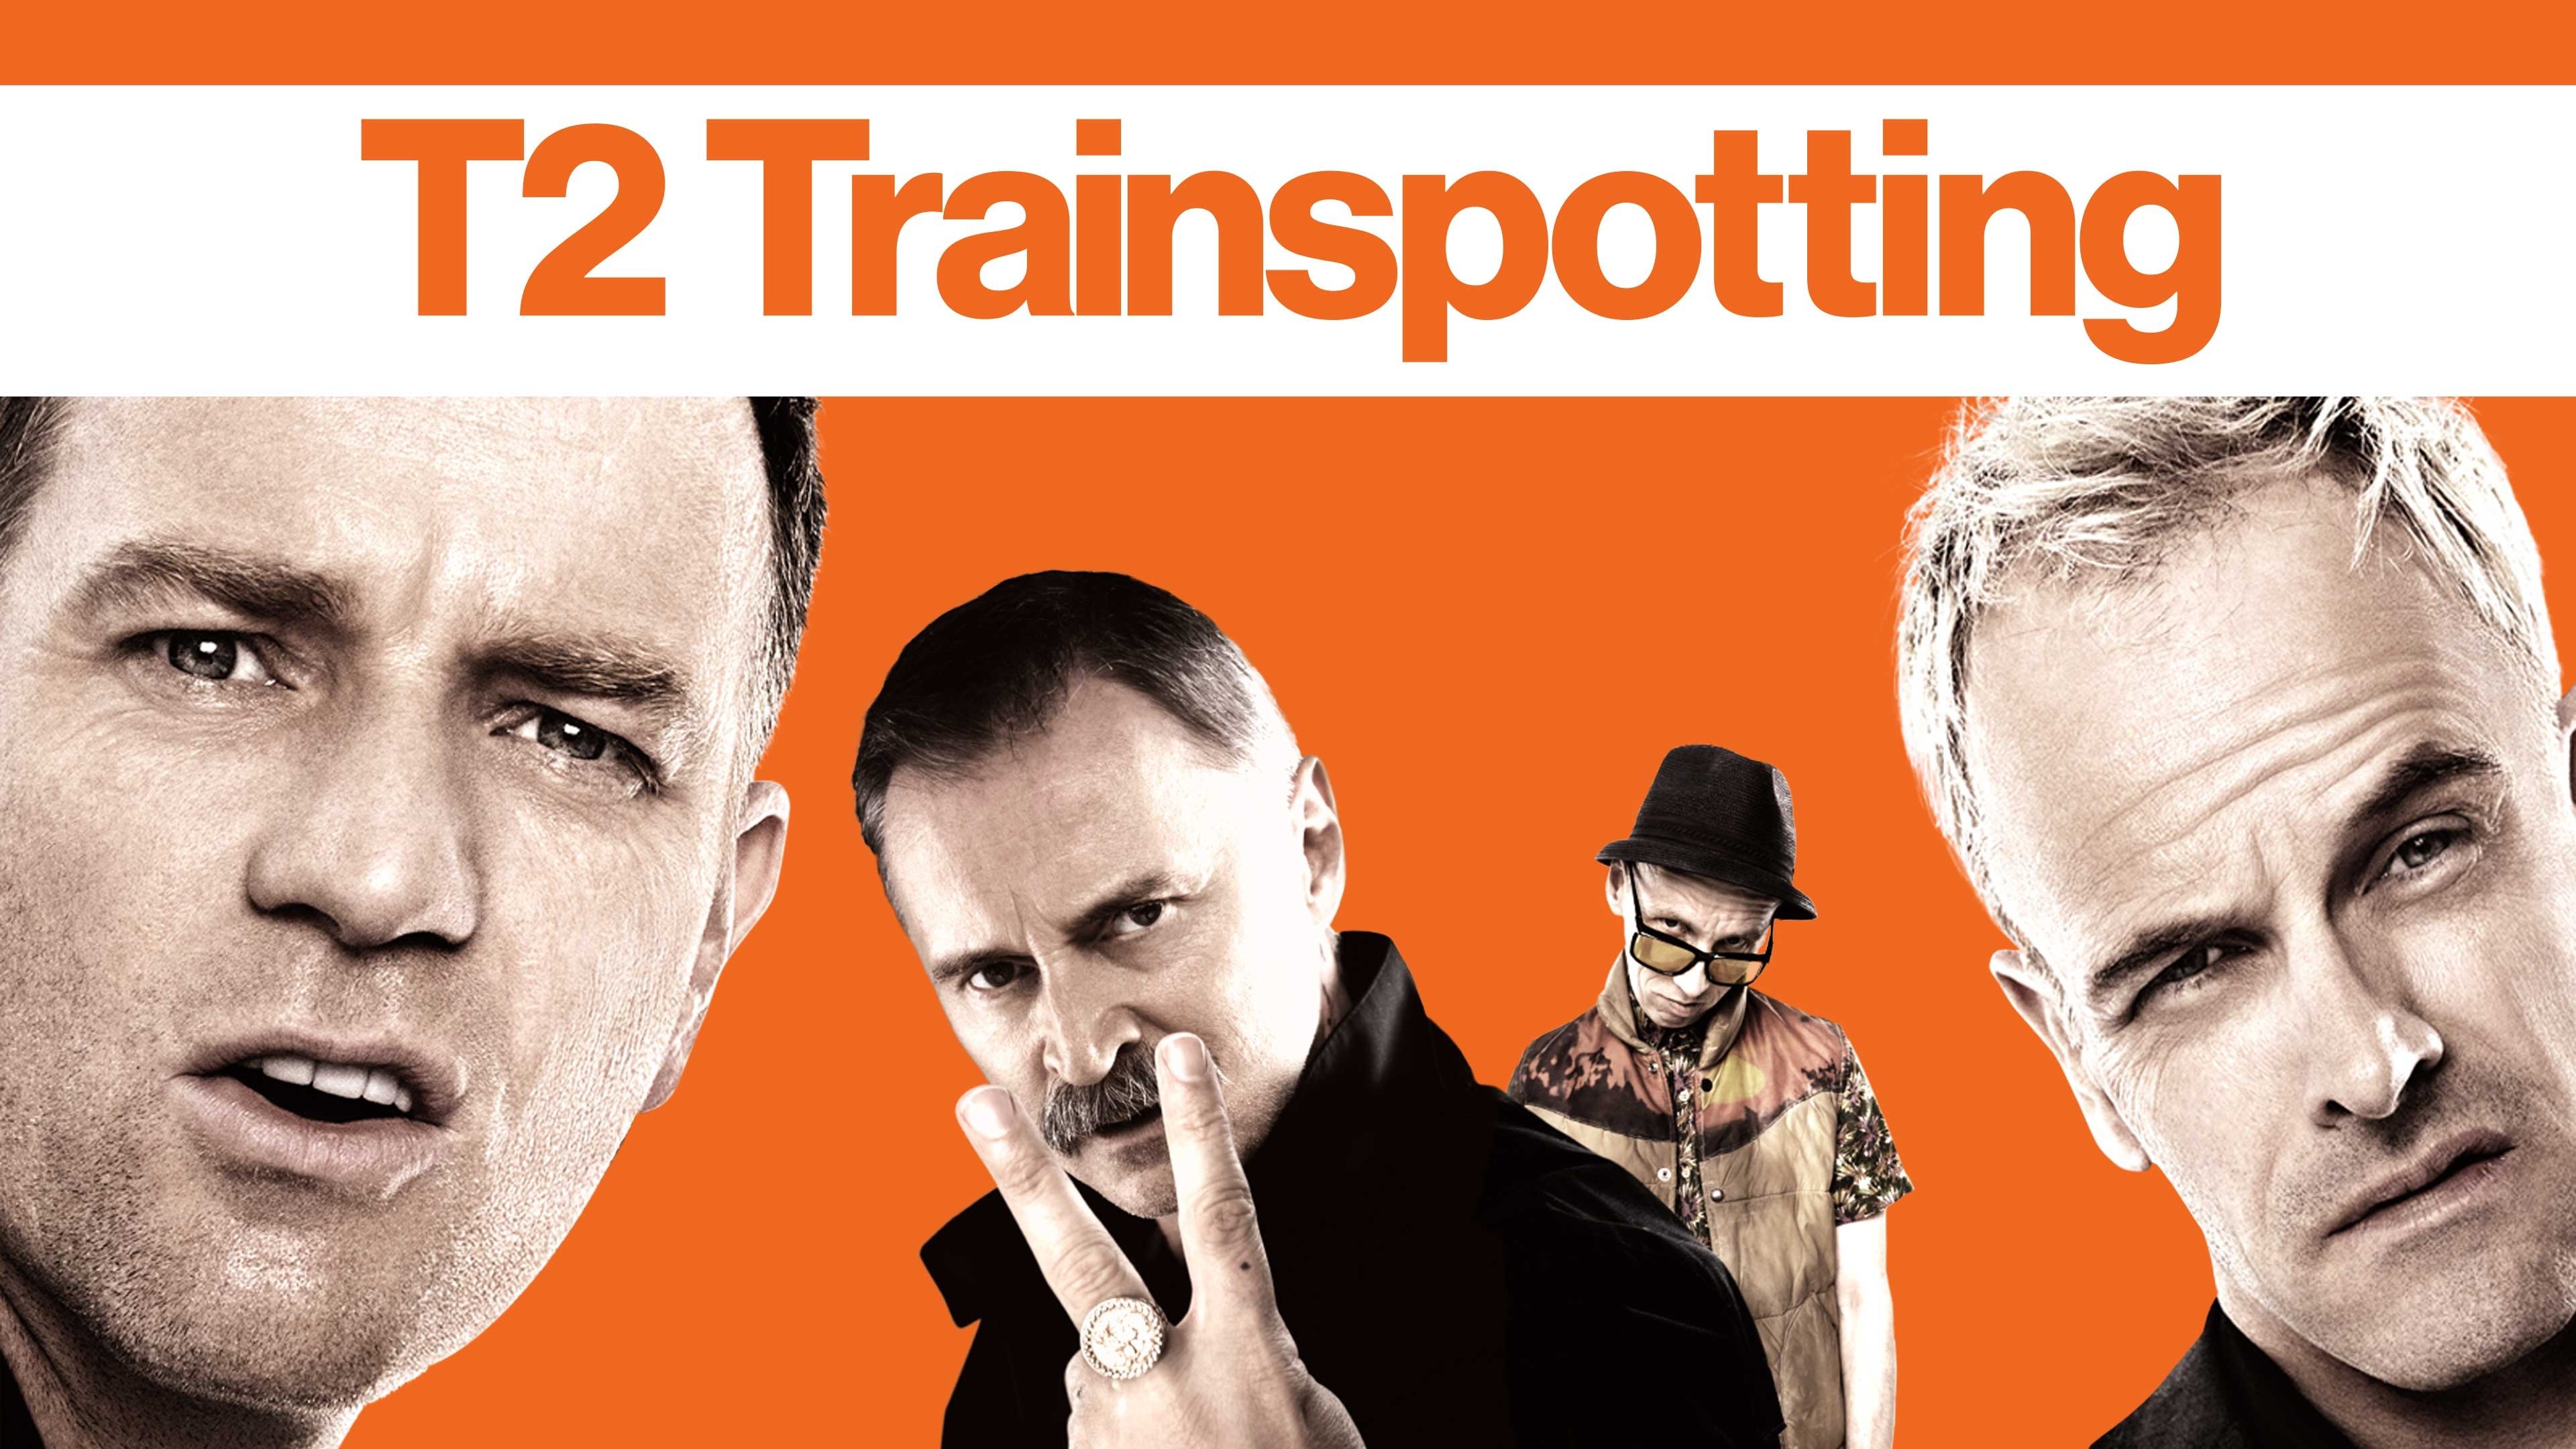 WATCH THE FIRST TRAILER FOR TRAINSPOTTING 2 | DJMag.com